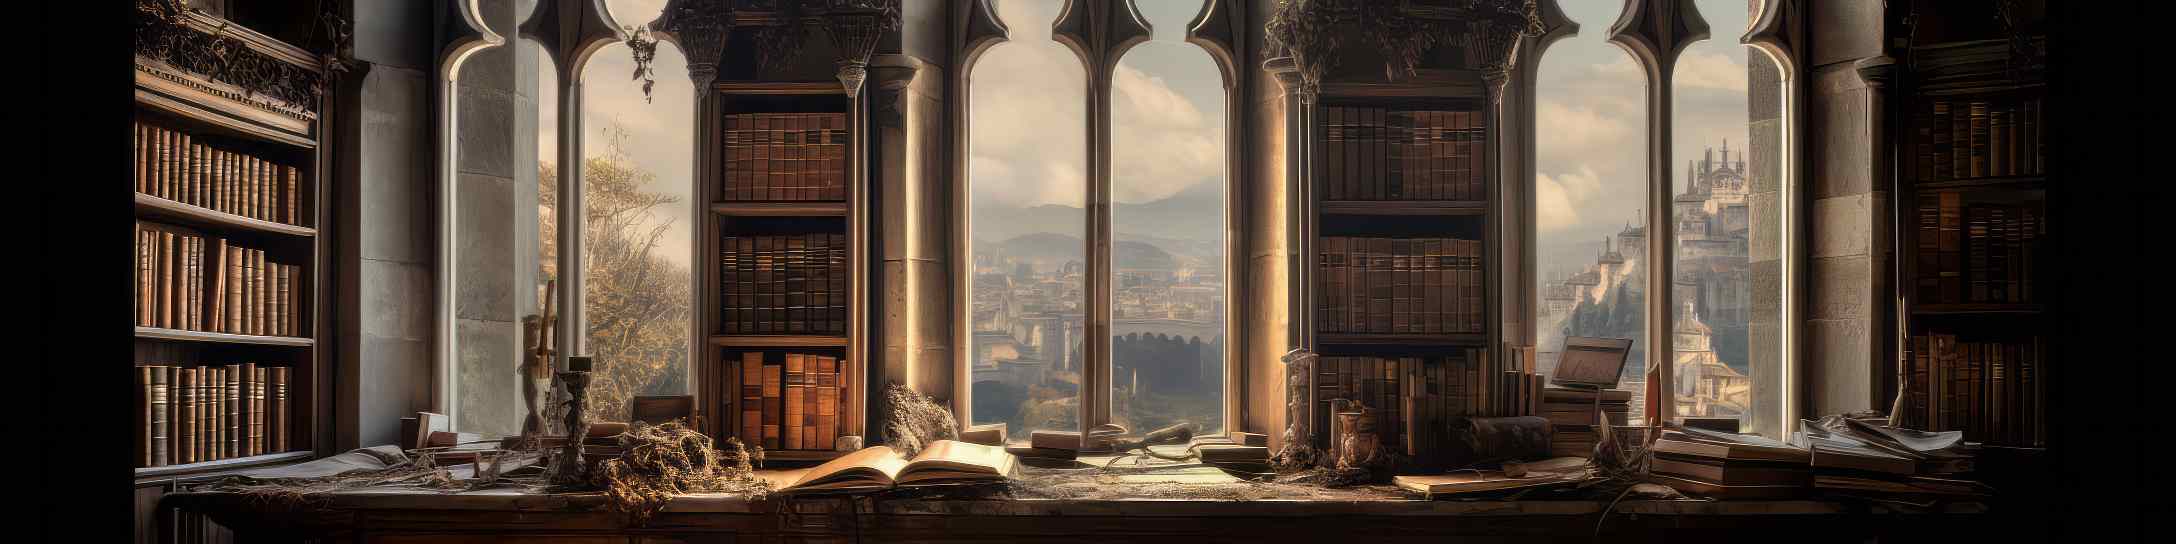 Dark Academia Library Inside Medieval Castle with Gothic Arch Architecture